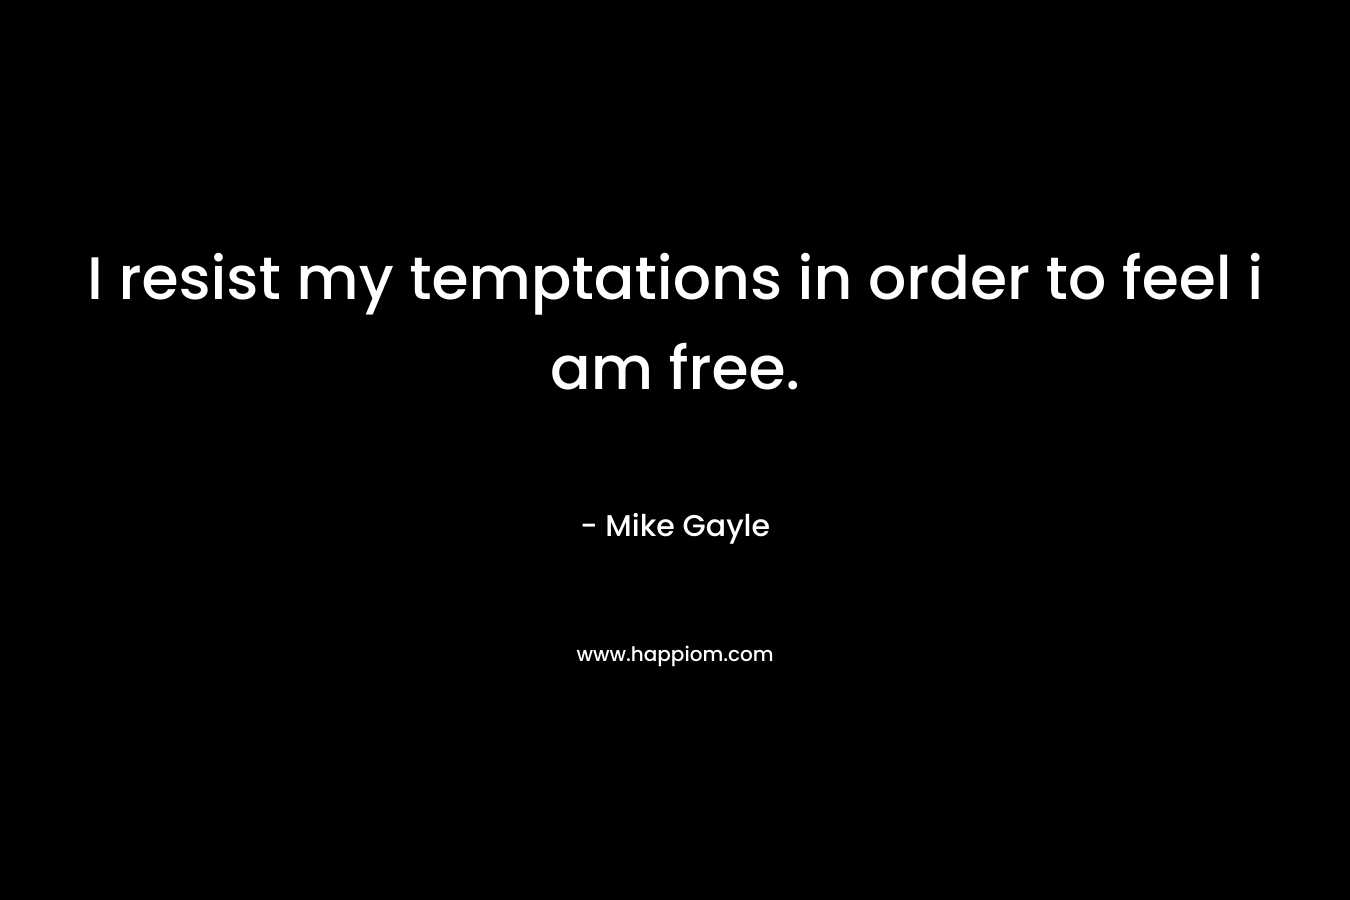 I resist my temptations in order to feel i am free. – Mike Gayle